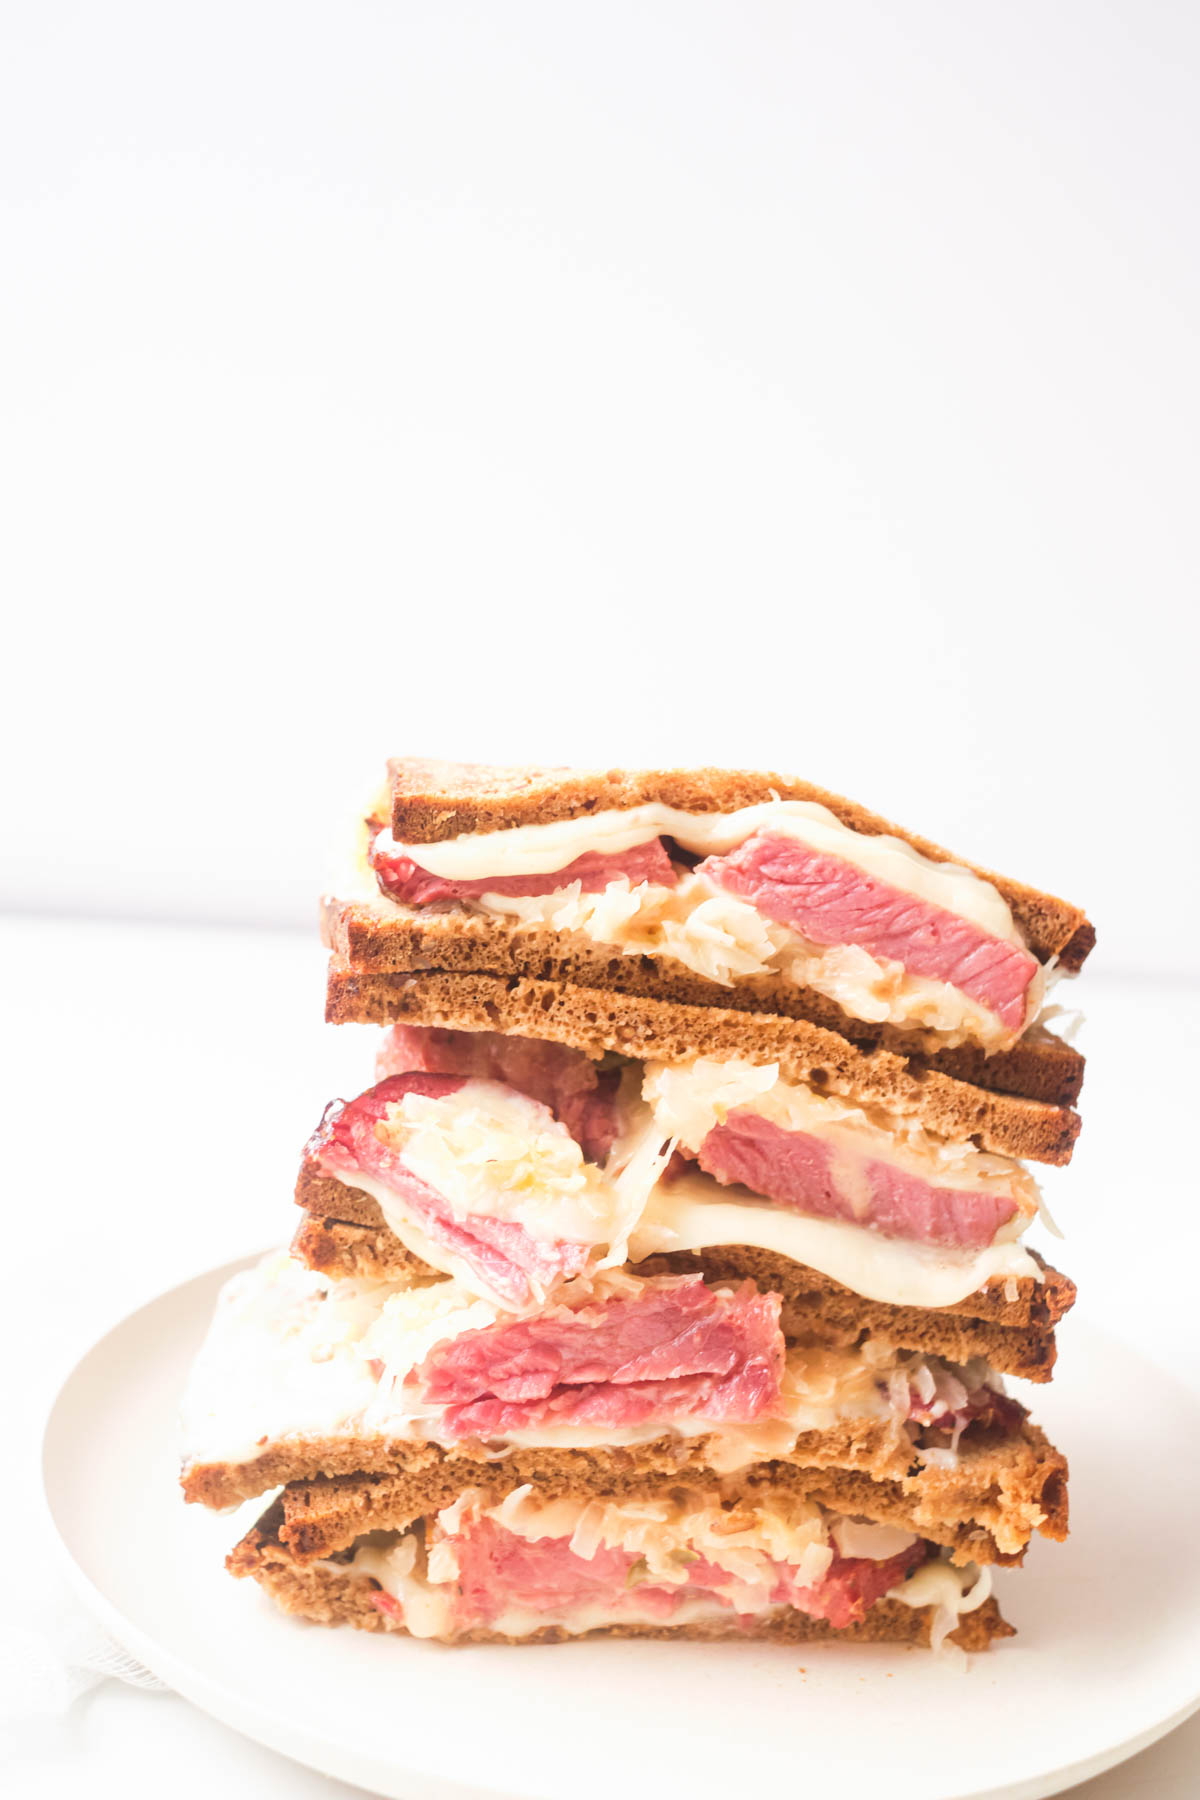 side view of the finished air fryer reuben sandwich served on a white plate